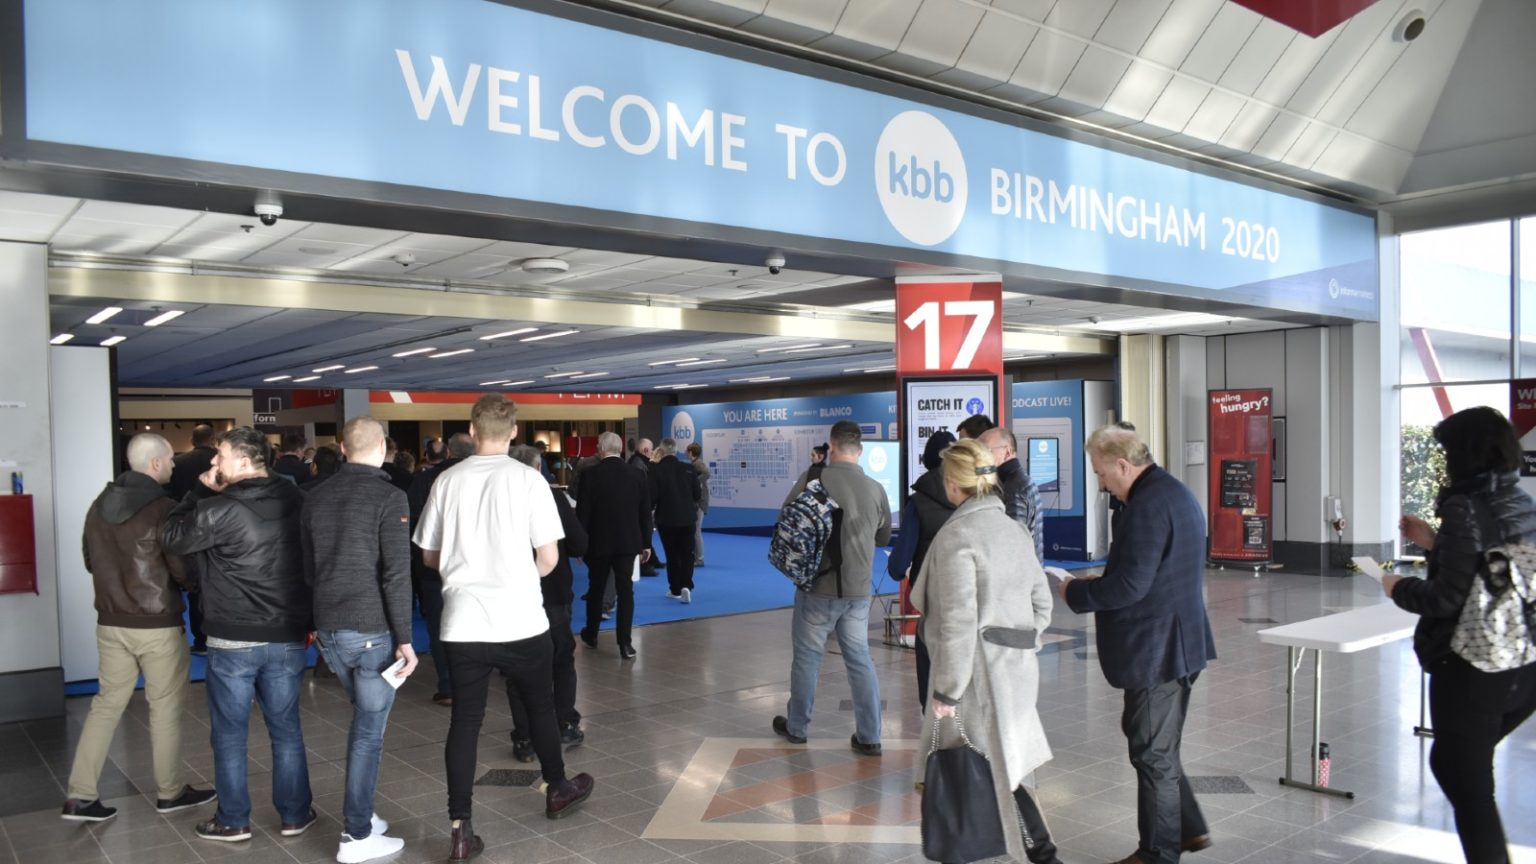 Kbb Birmingham returns to NEC in 2022 Kitchens and Bathrooms News